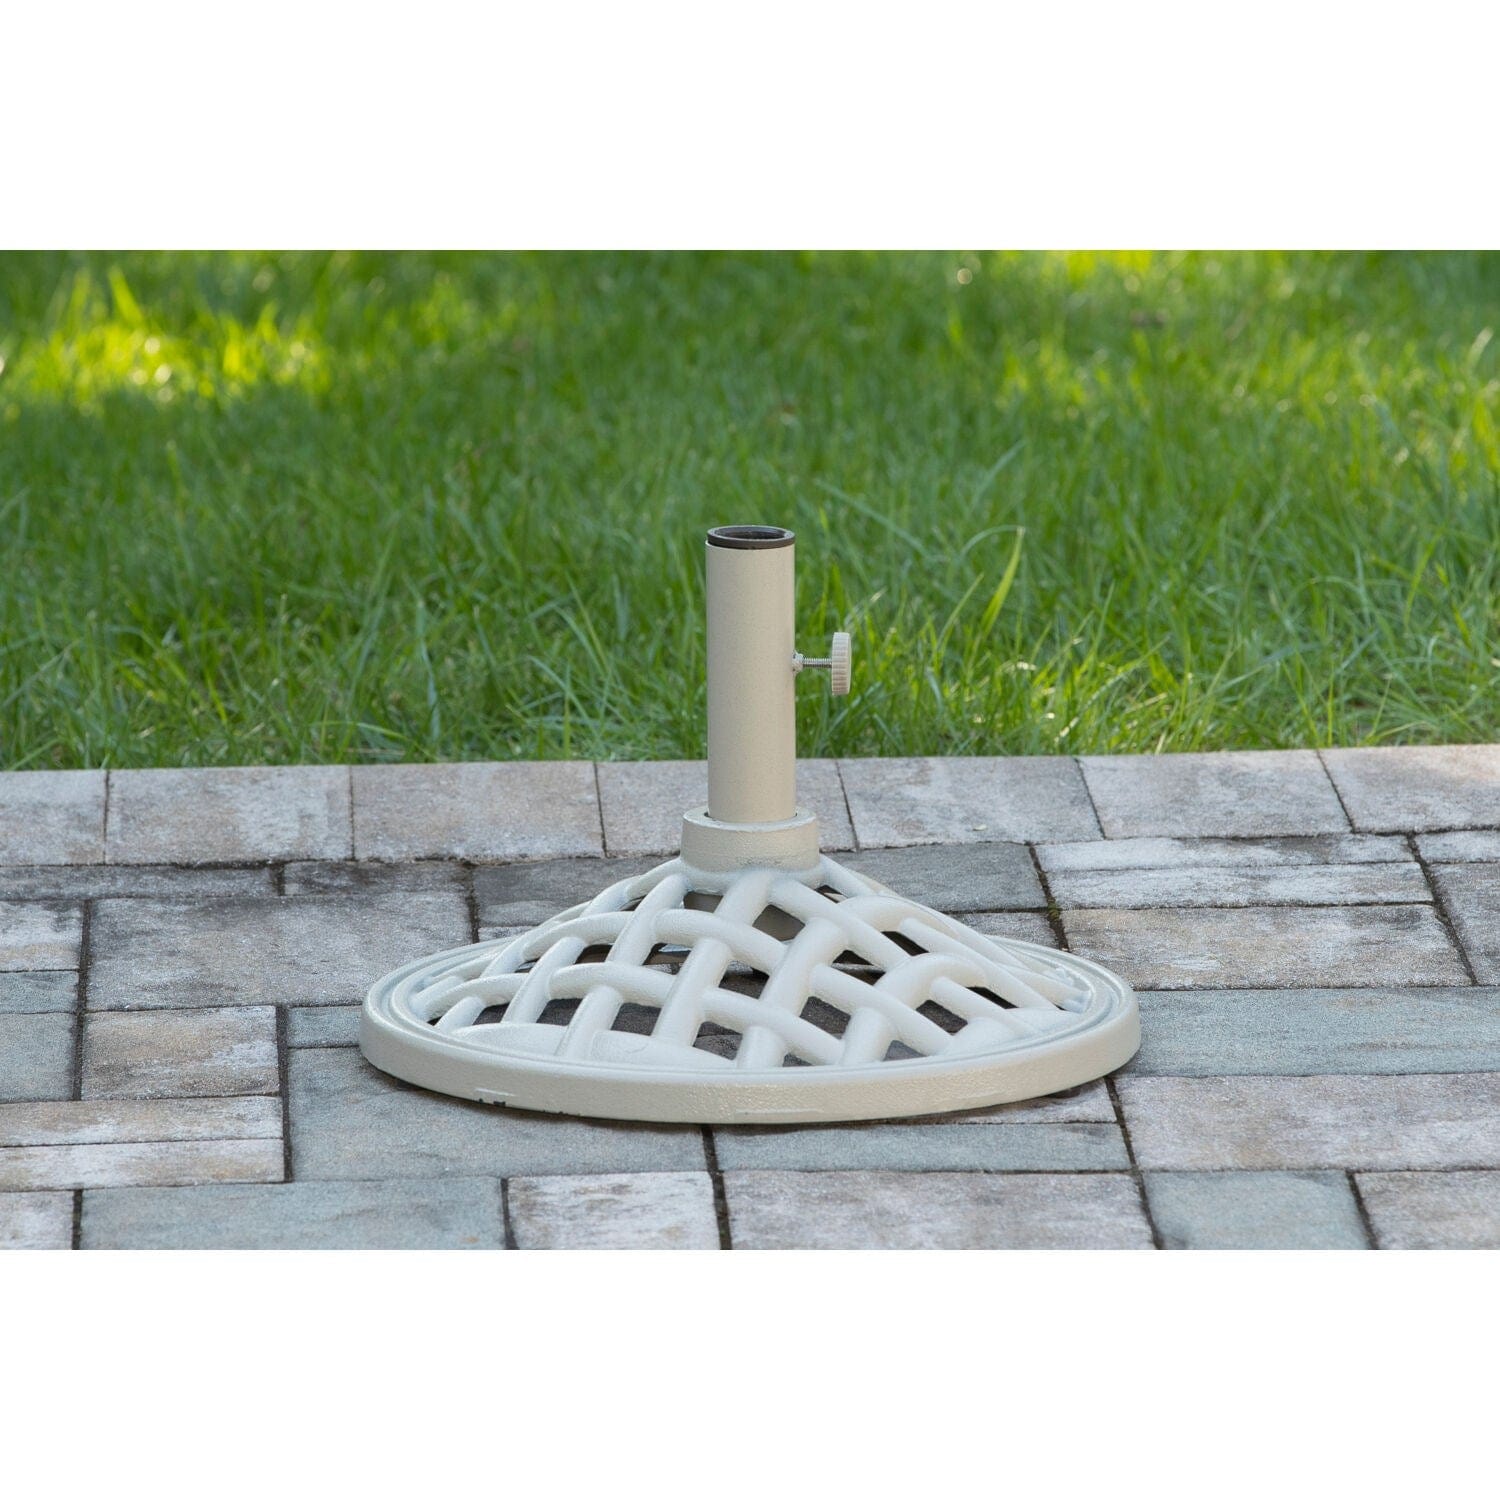 Hanover Umbrella Base Hanover - Umbrella Base for Traditions Sand Dining | Sand | UMBBASE-BE